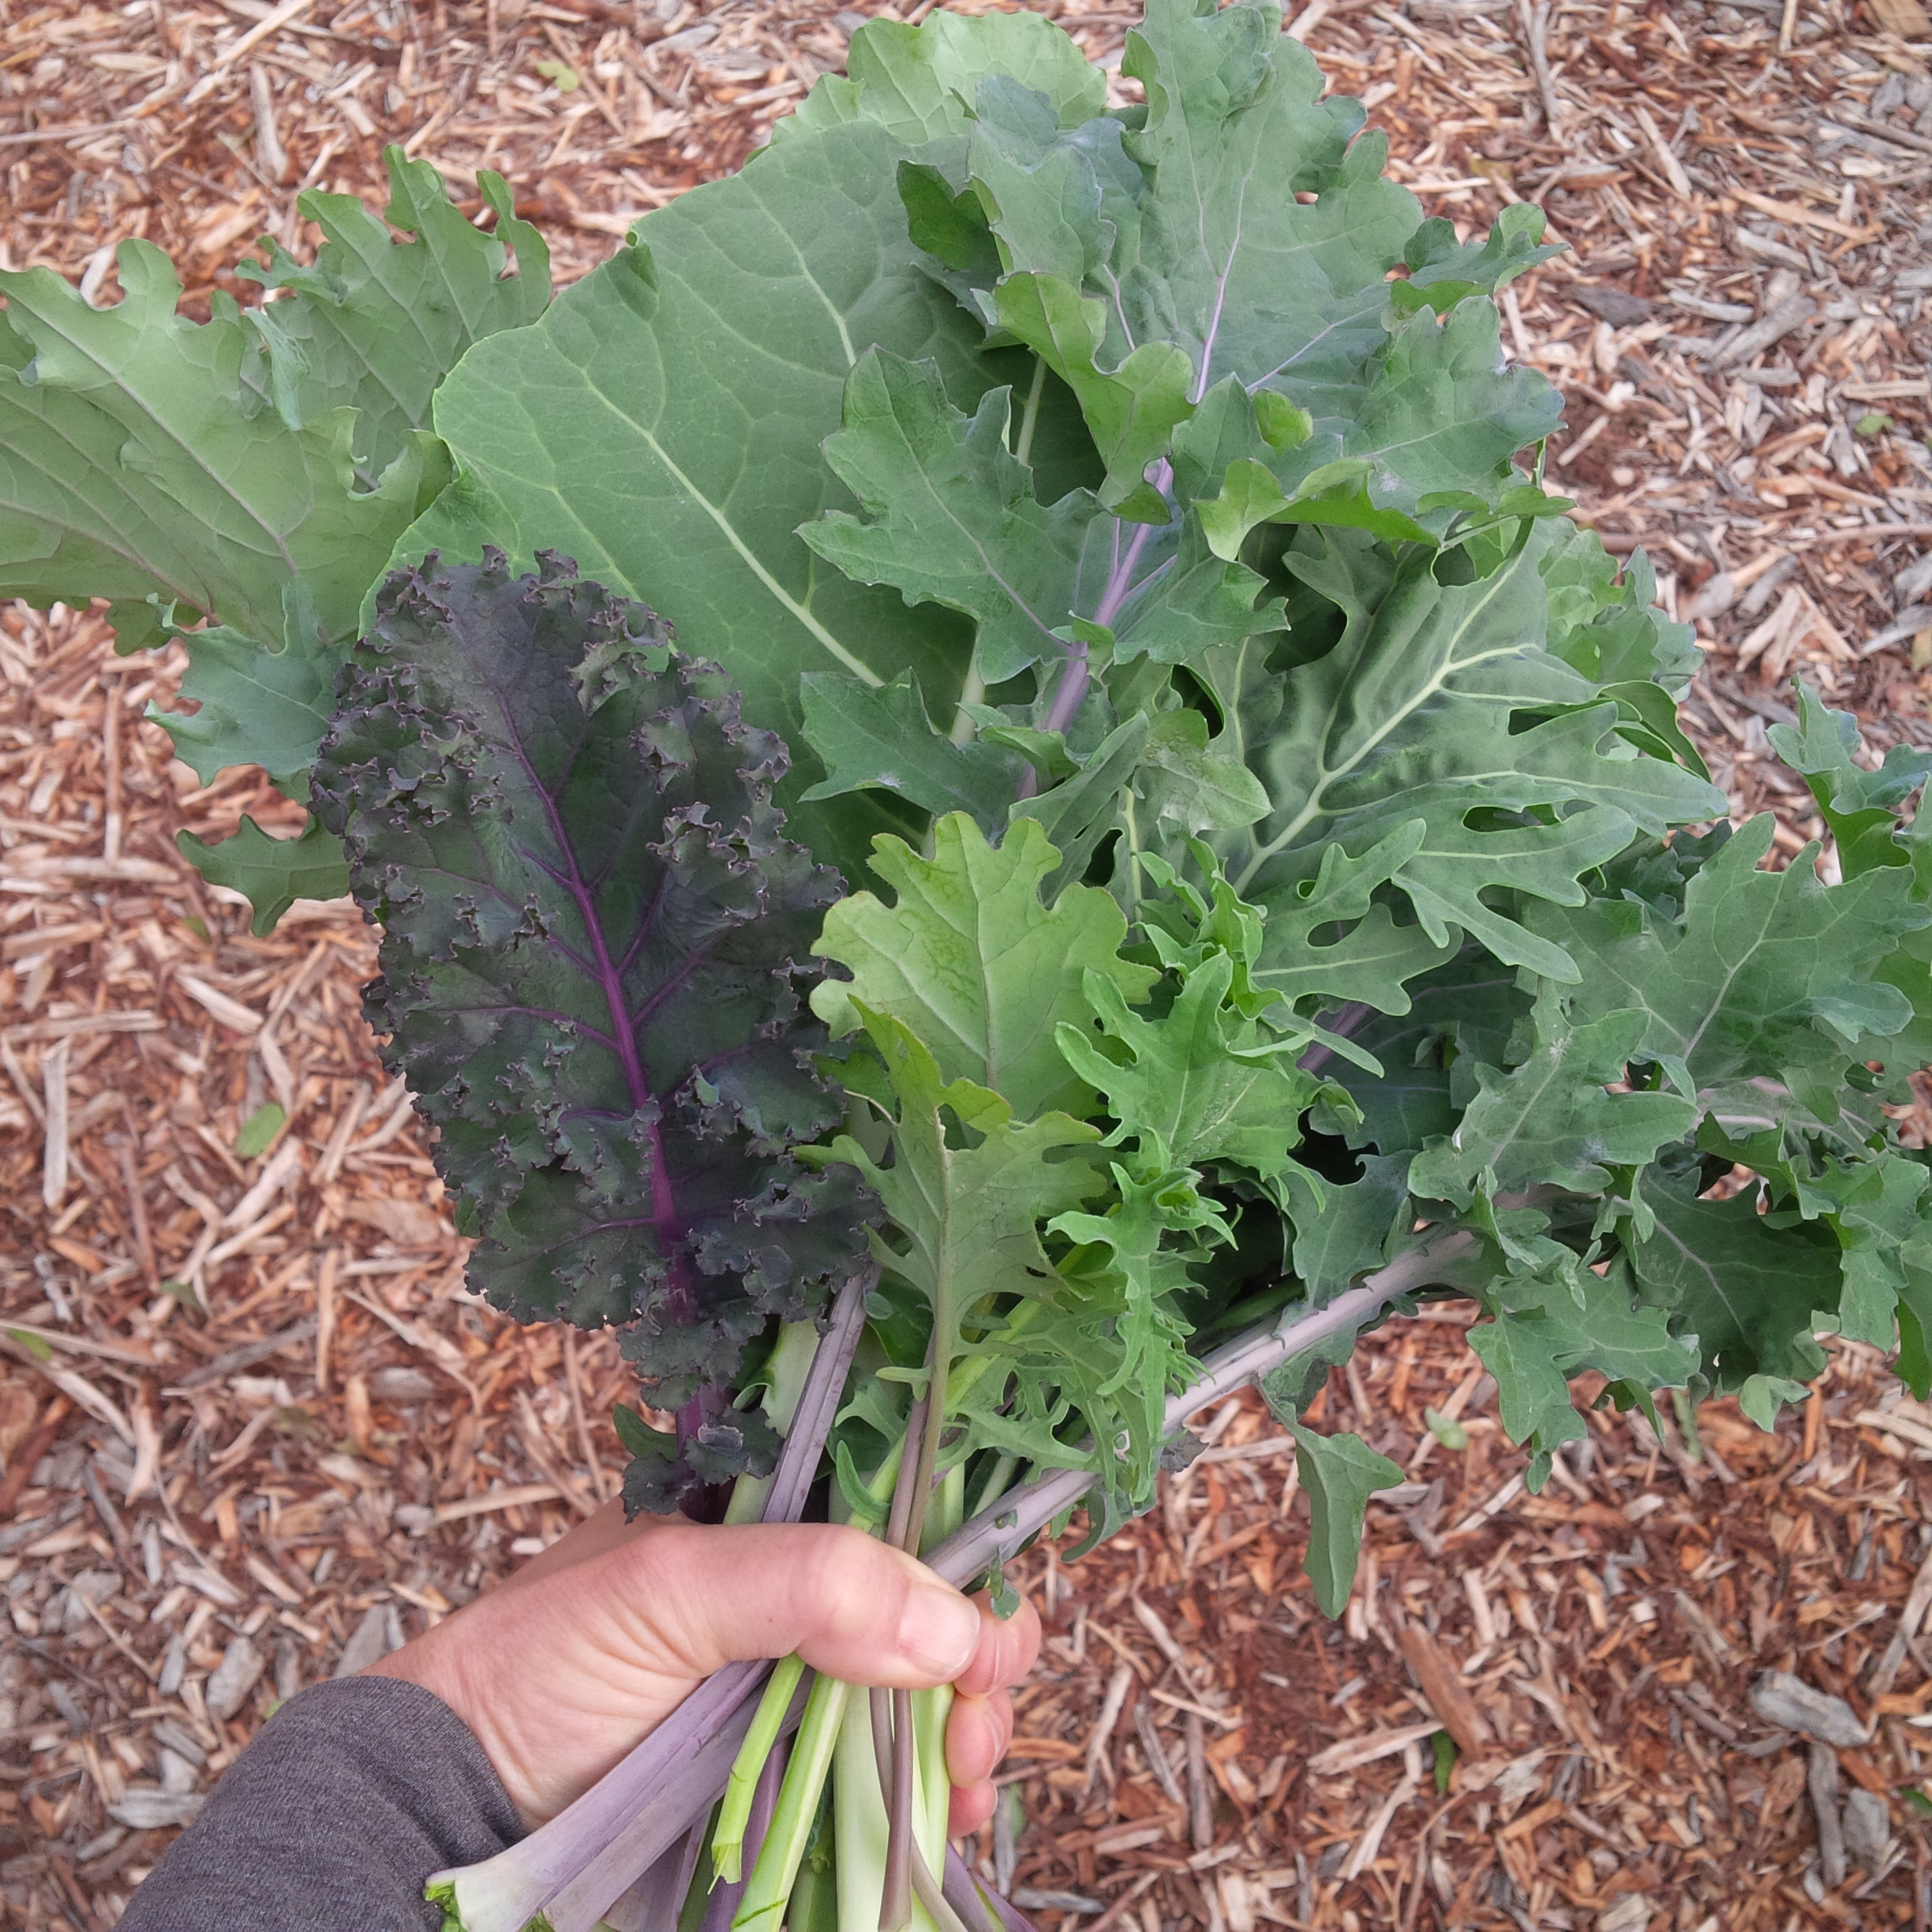 10 varieties of kale at the ready.